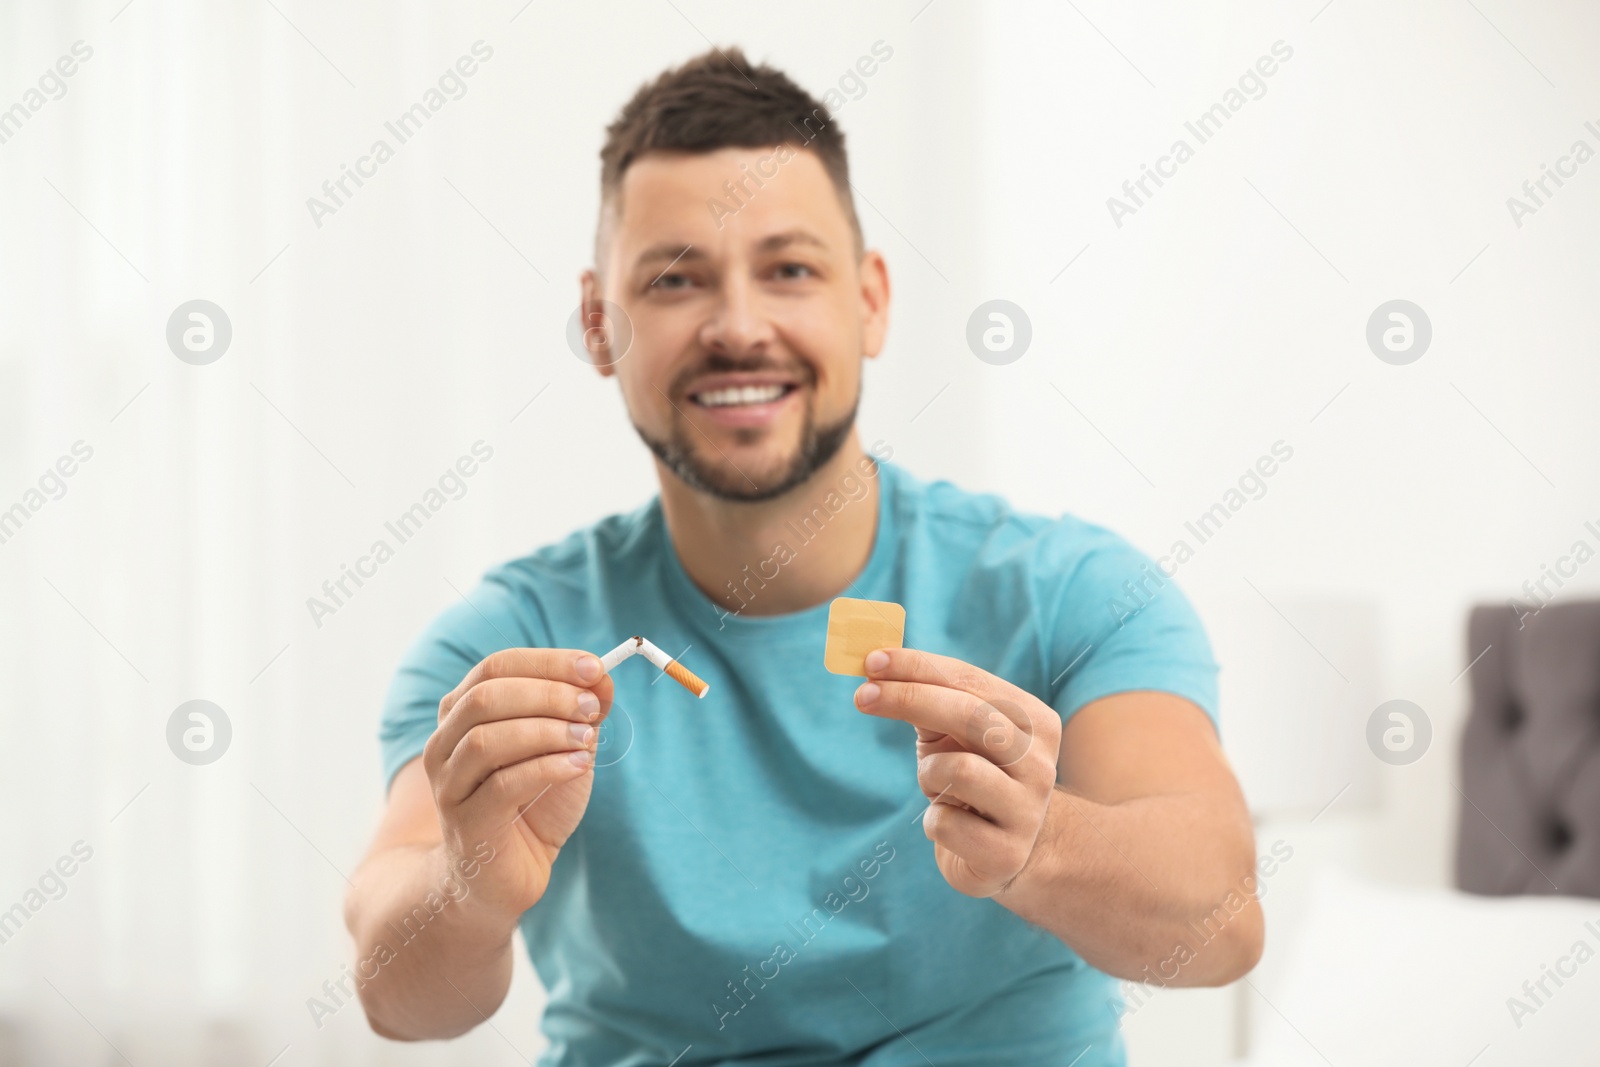 Photo of Happy man with nicotine patch and cigarette in bedroom, focus on hands